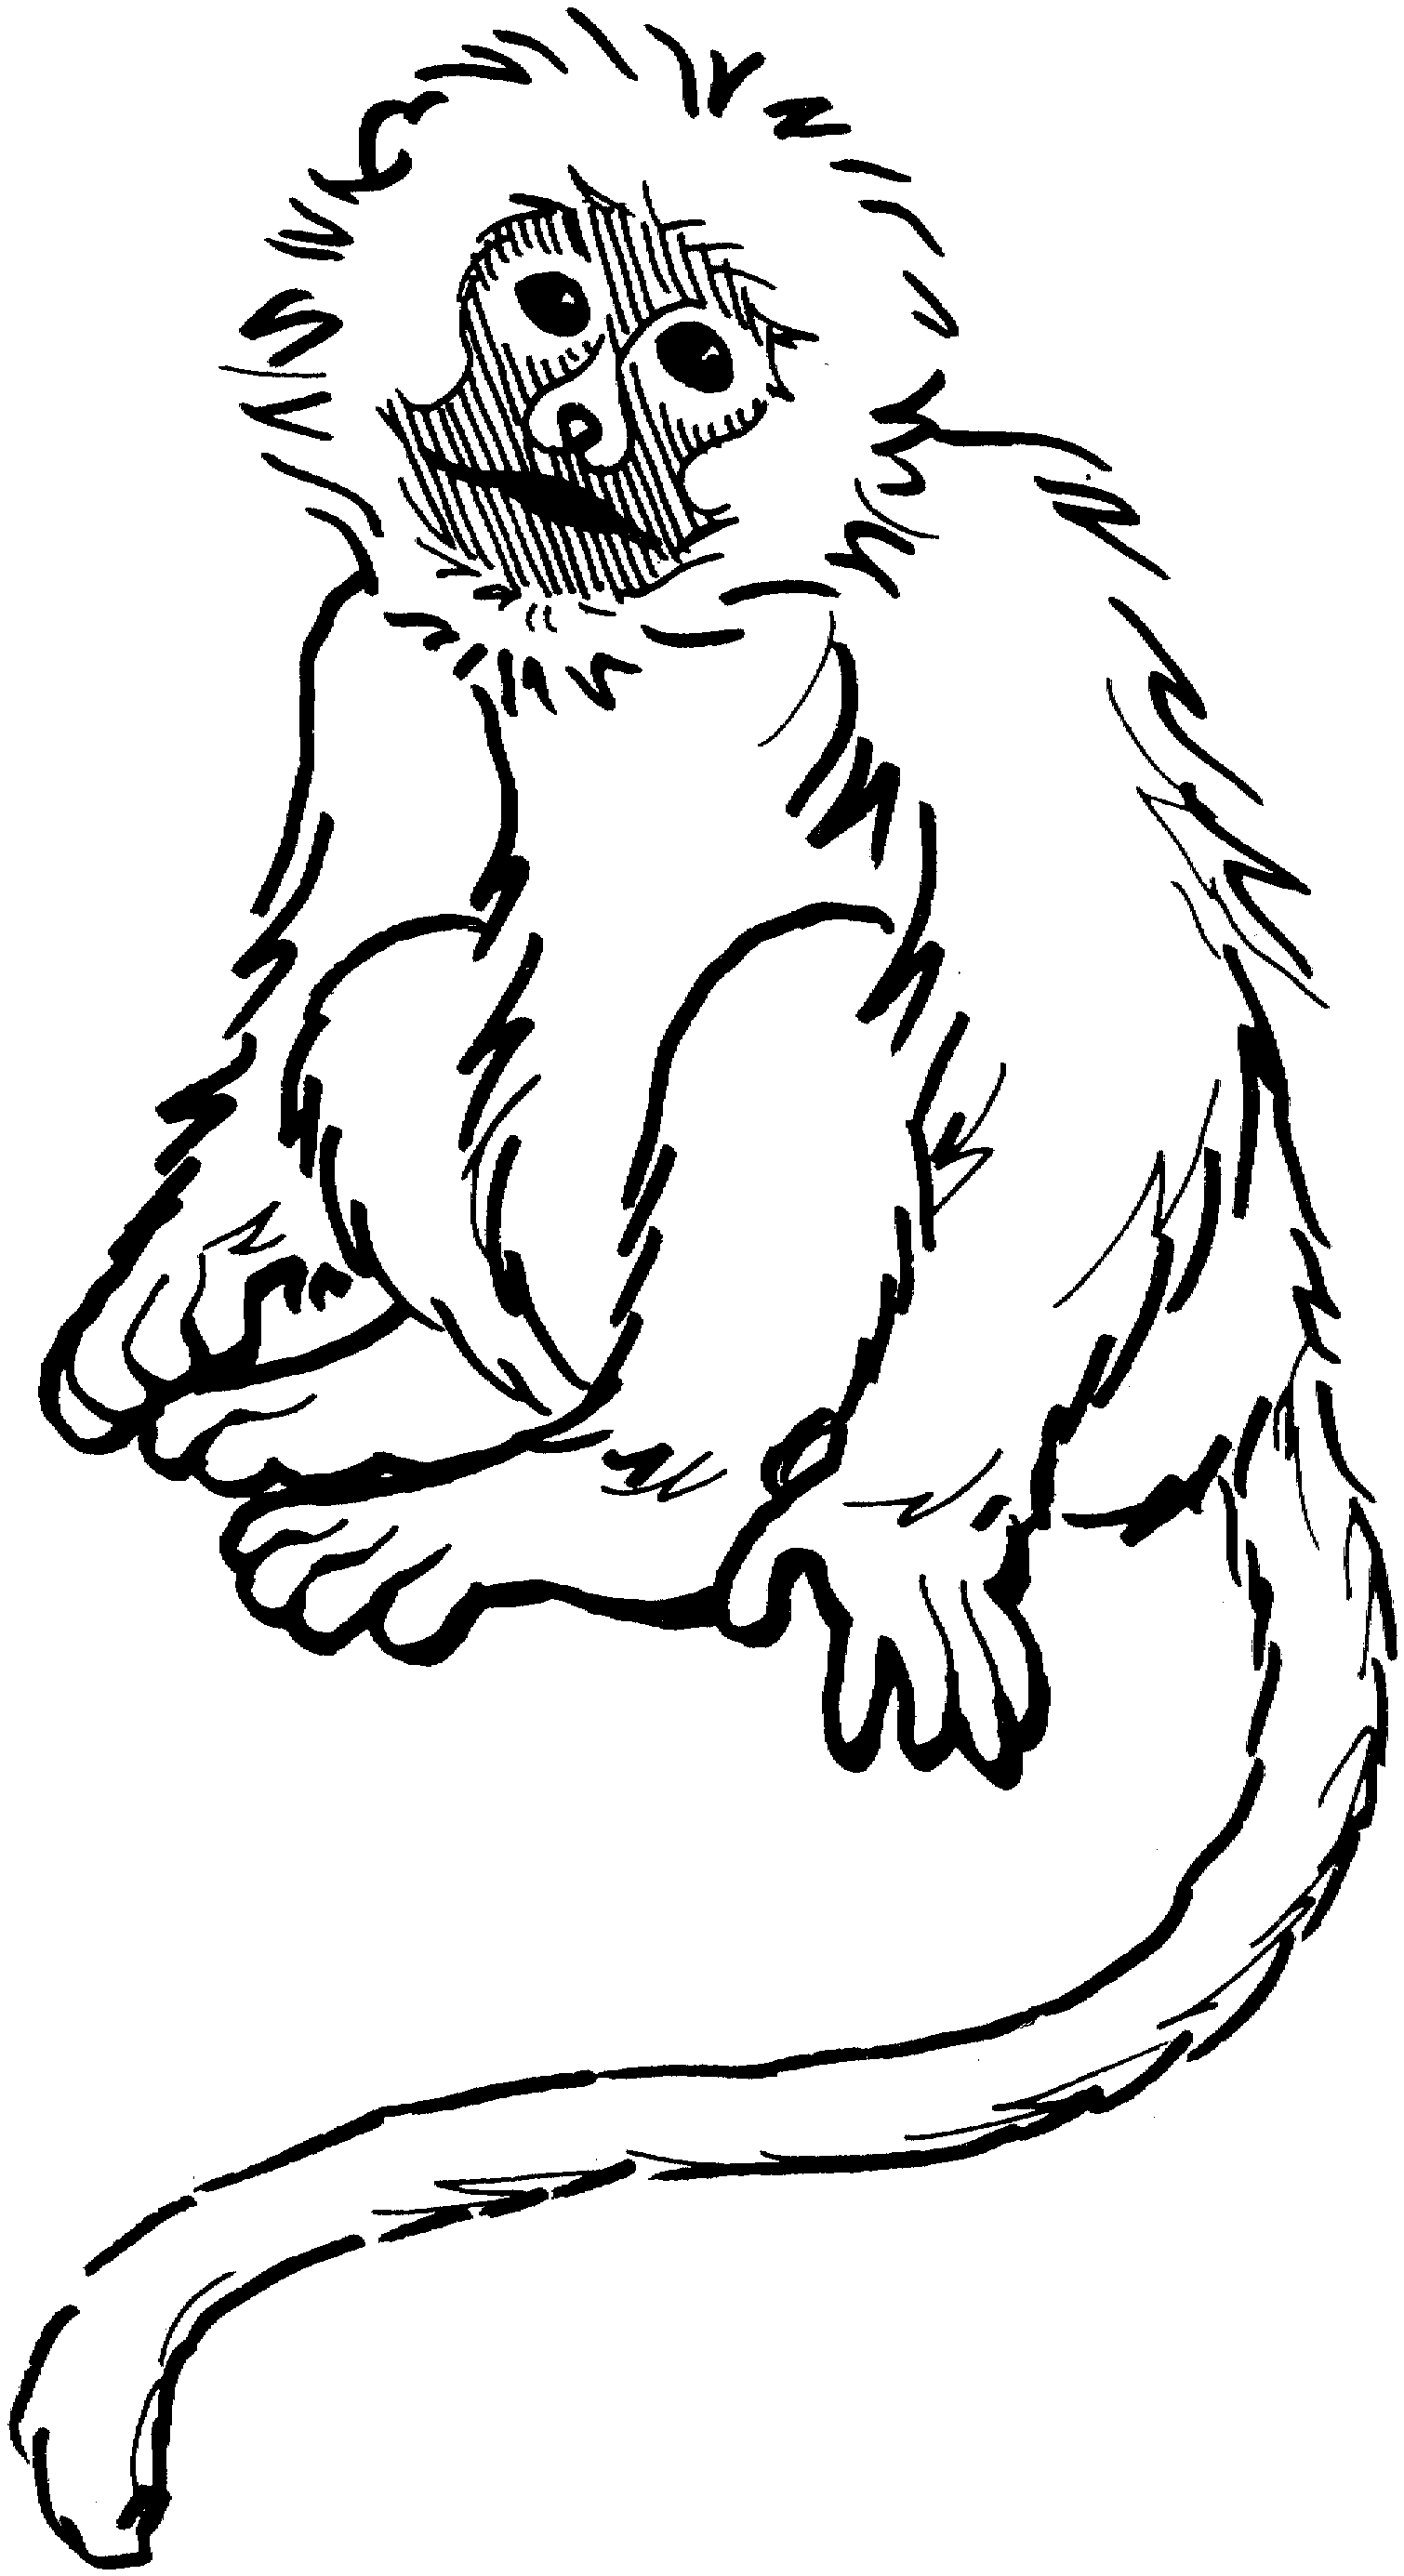 spider-monkey-pictures-free-cliparts-co